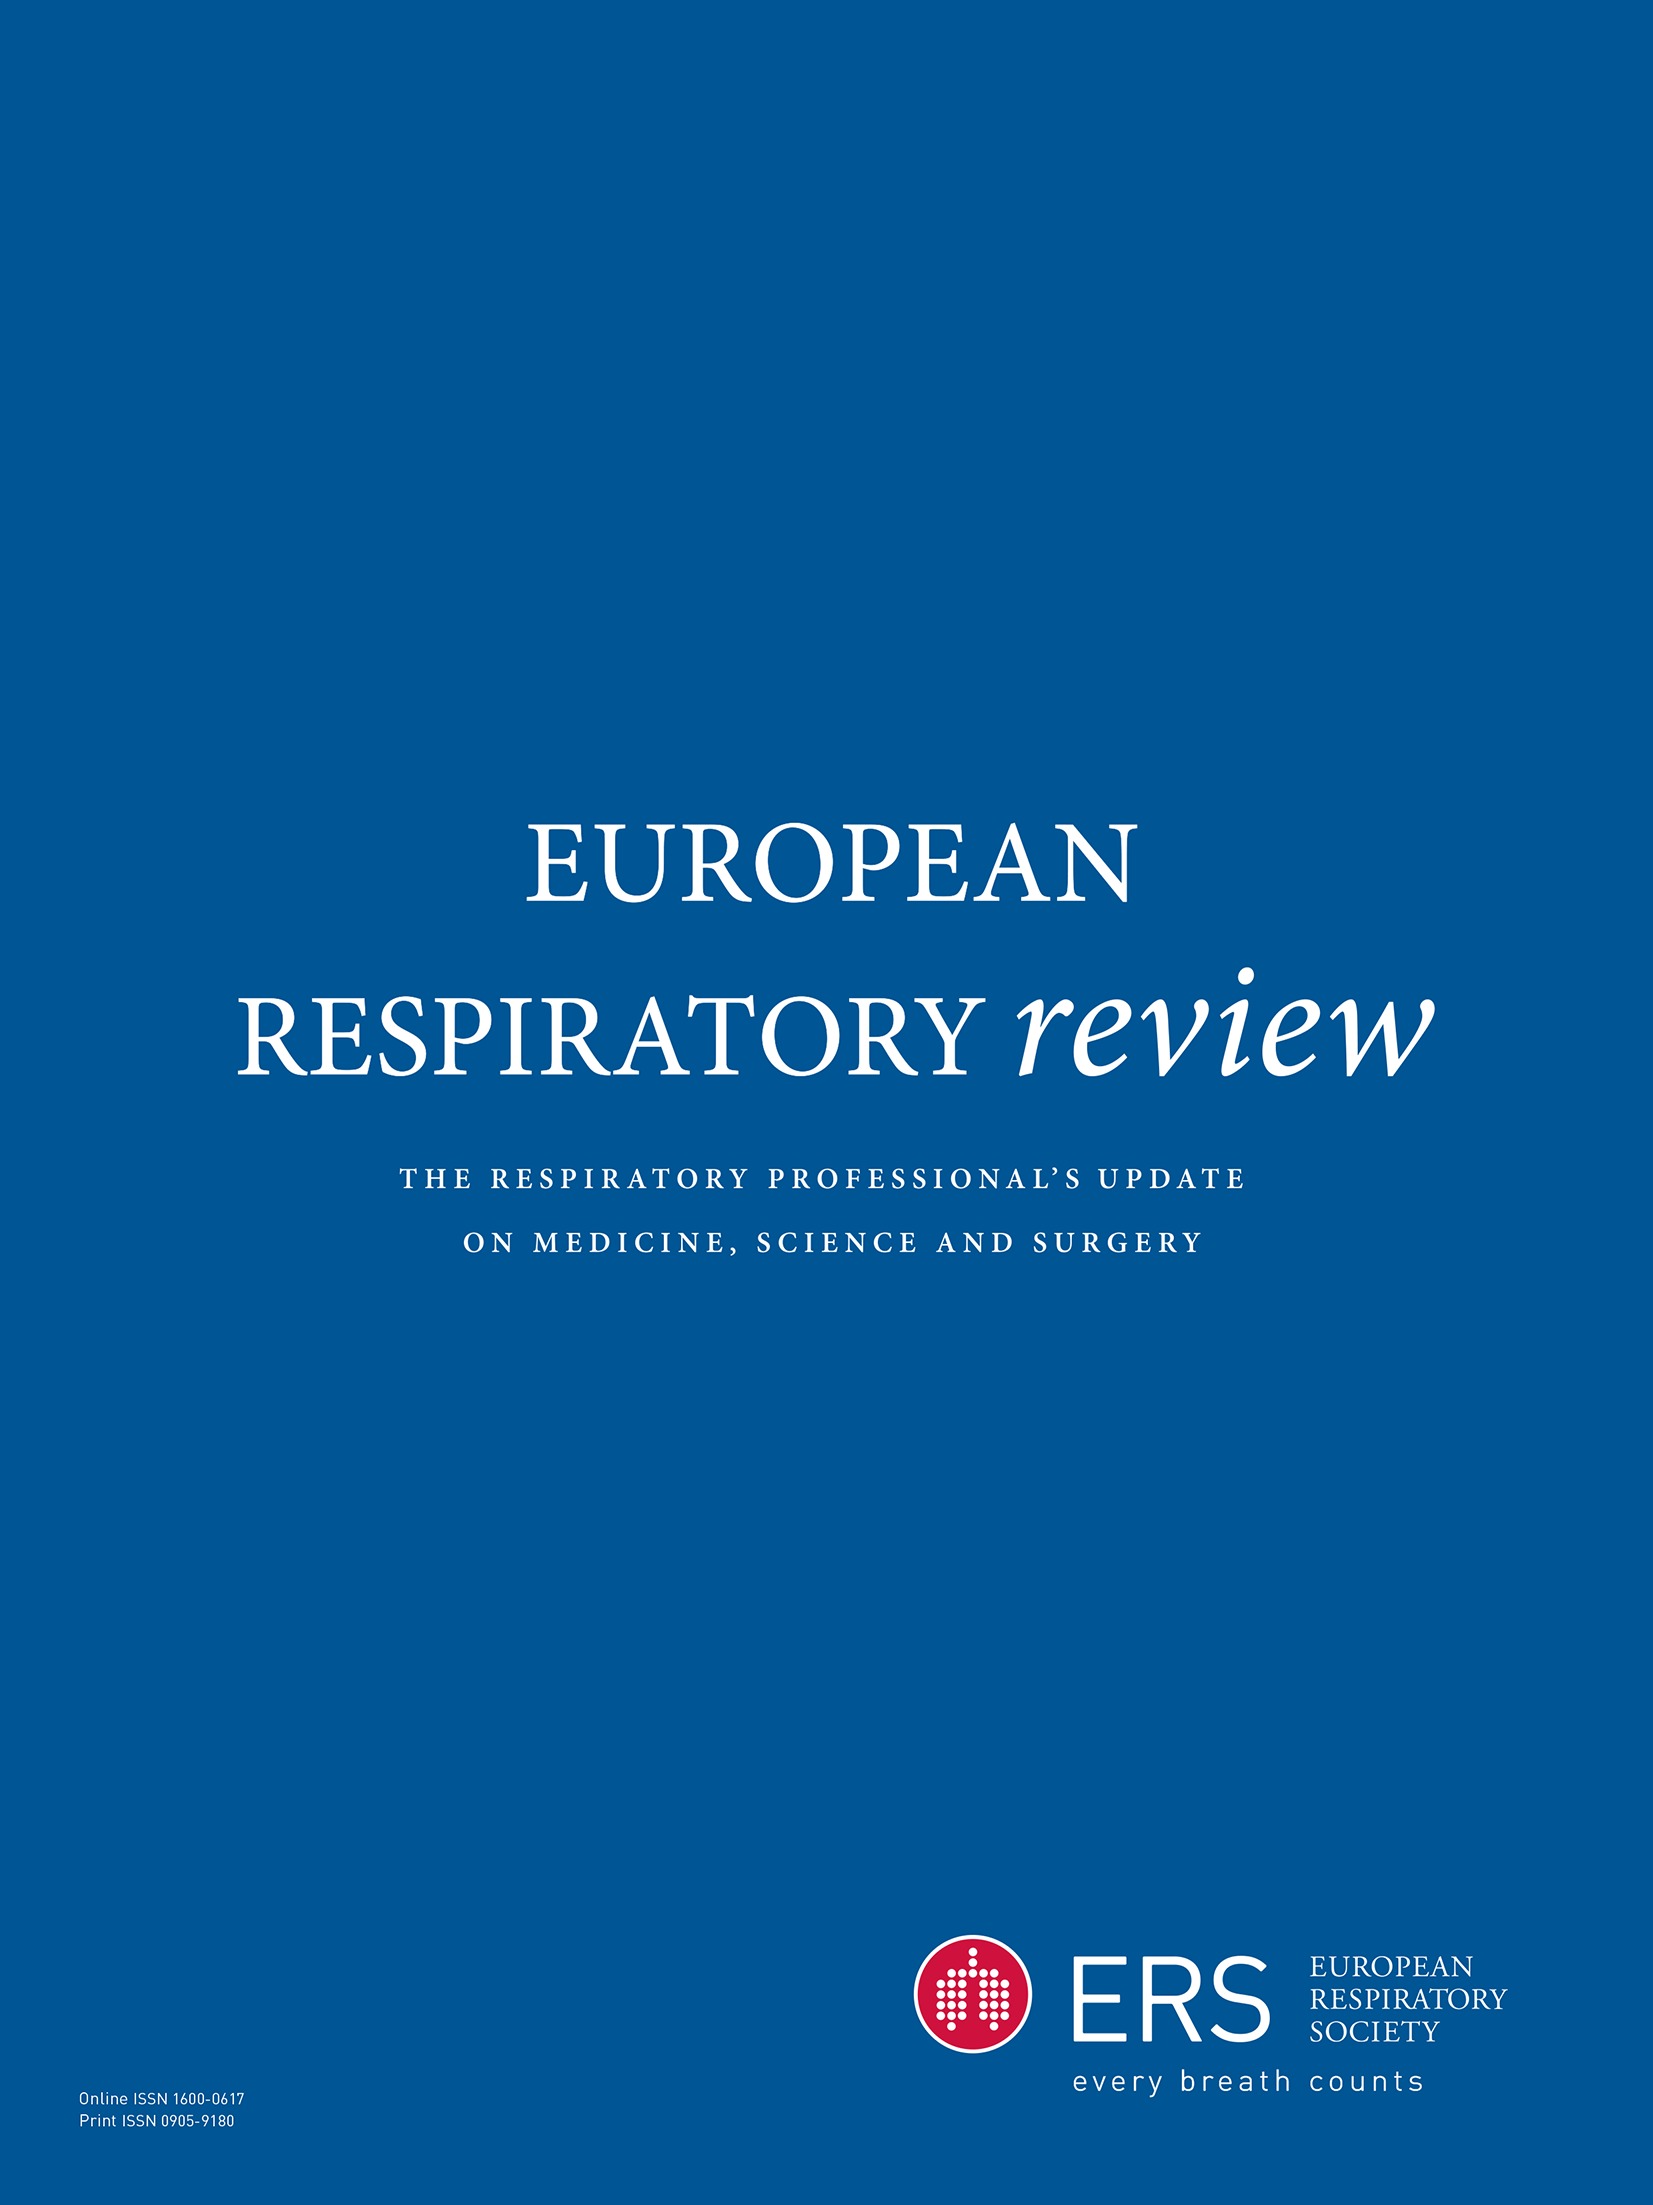 Respiratory viruses: their importance and lessons learned from COVID-19